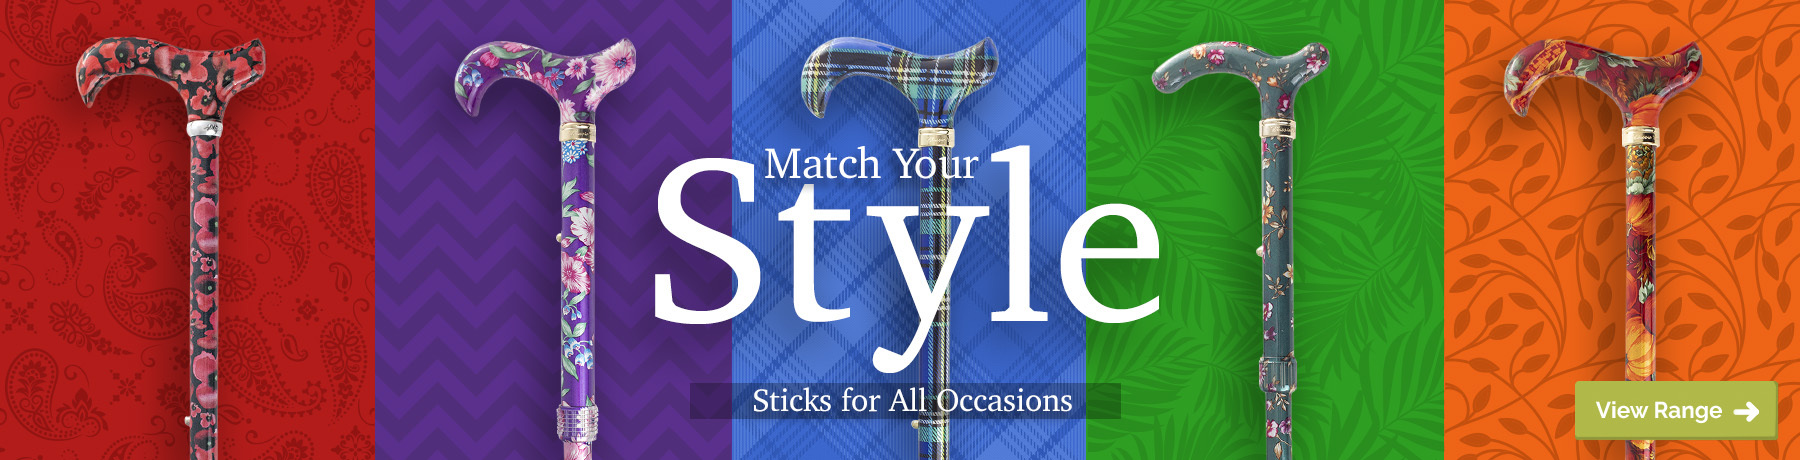 Match Your Style